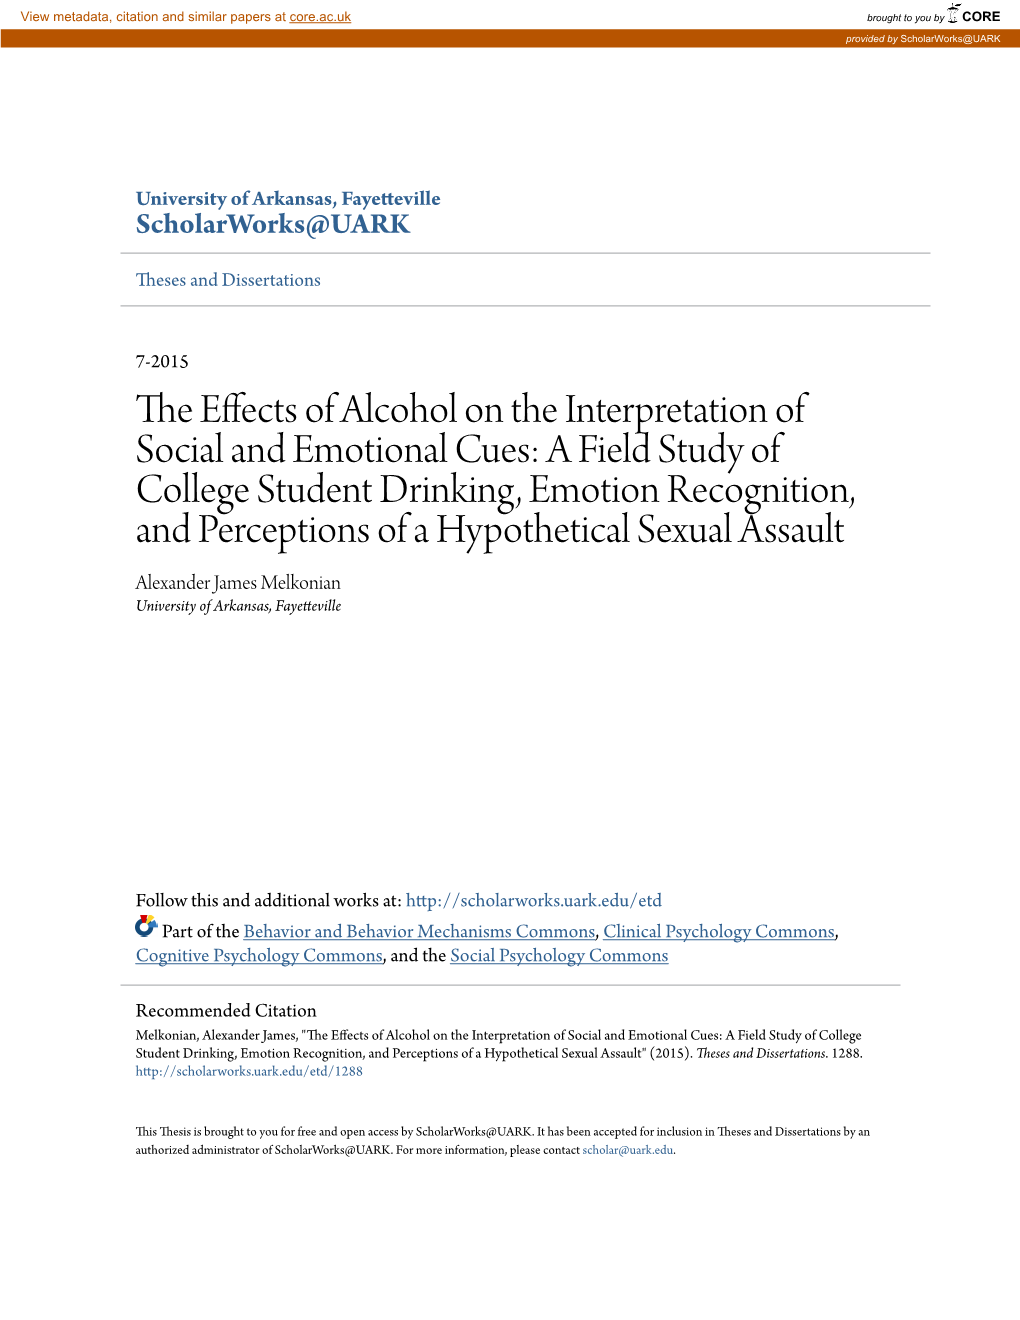 The Effects of Alcohol on the Interpretation of Social and Emotional Cues